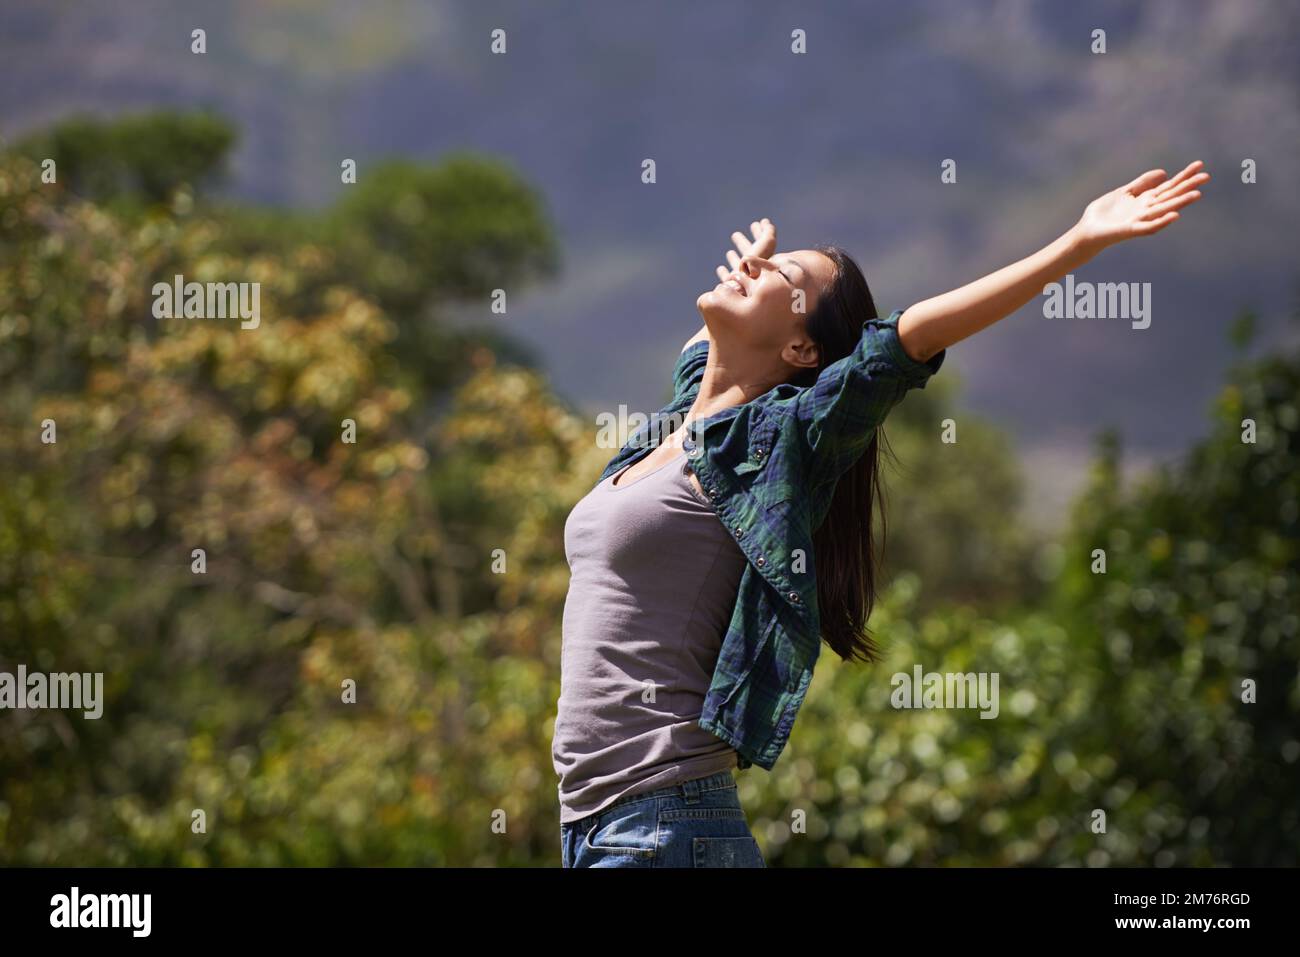 Leaving herself wide open. Portrait of an attractive young woman celebrating the day outside. Stock Photo